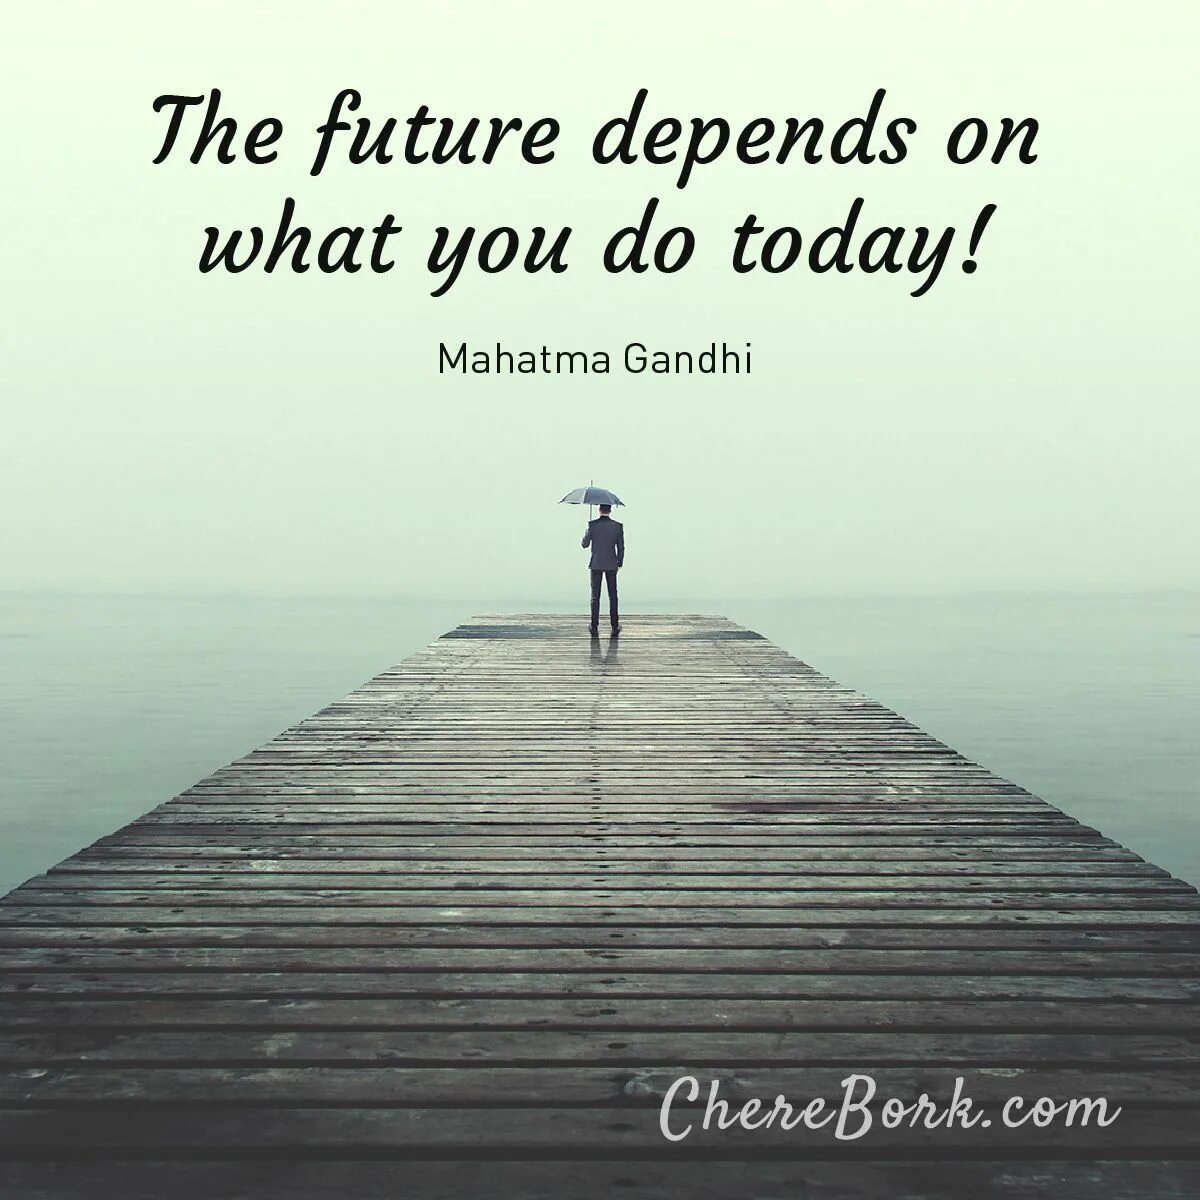 Take your future. The Future depends on what you do today. Depend on. Future is done today картинка. Depends on картинка.